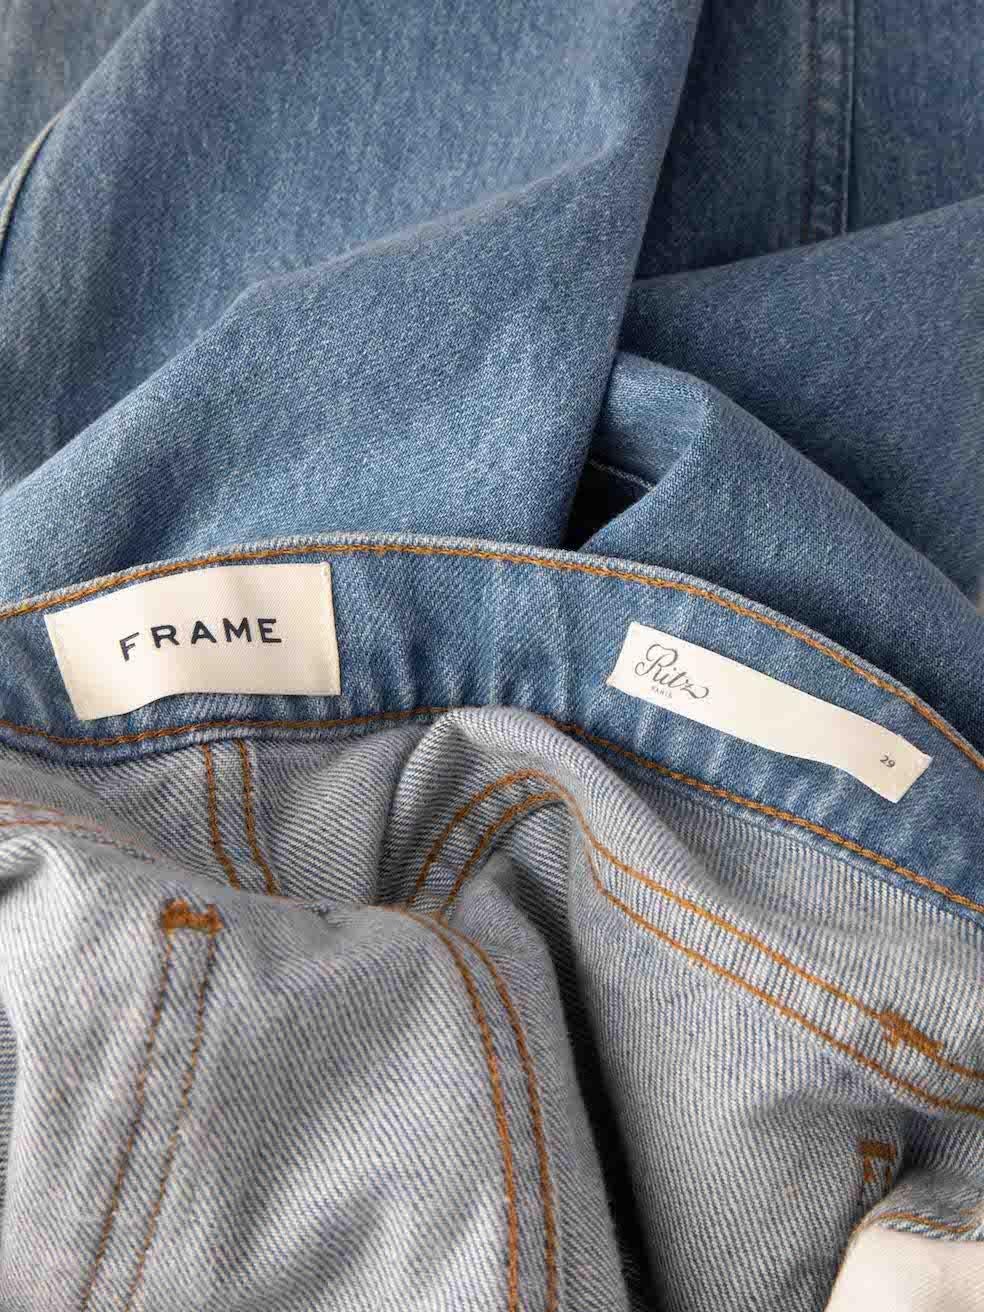 FRAME x Ritz Blue Denim Cropped Jeans Size M For Sale 1